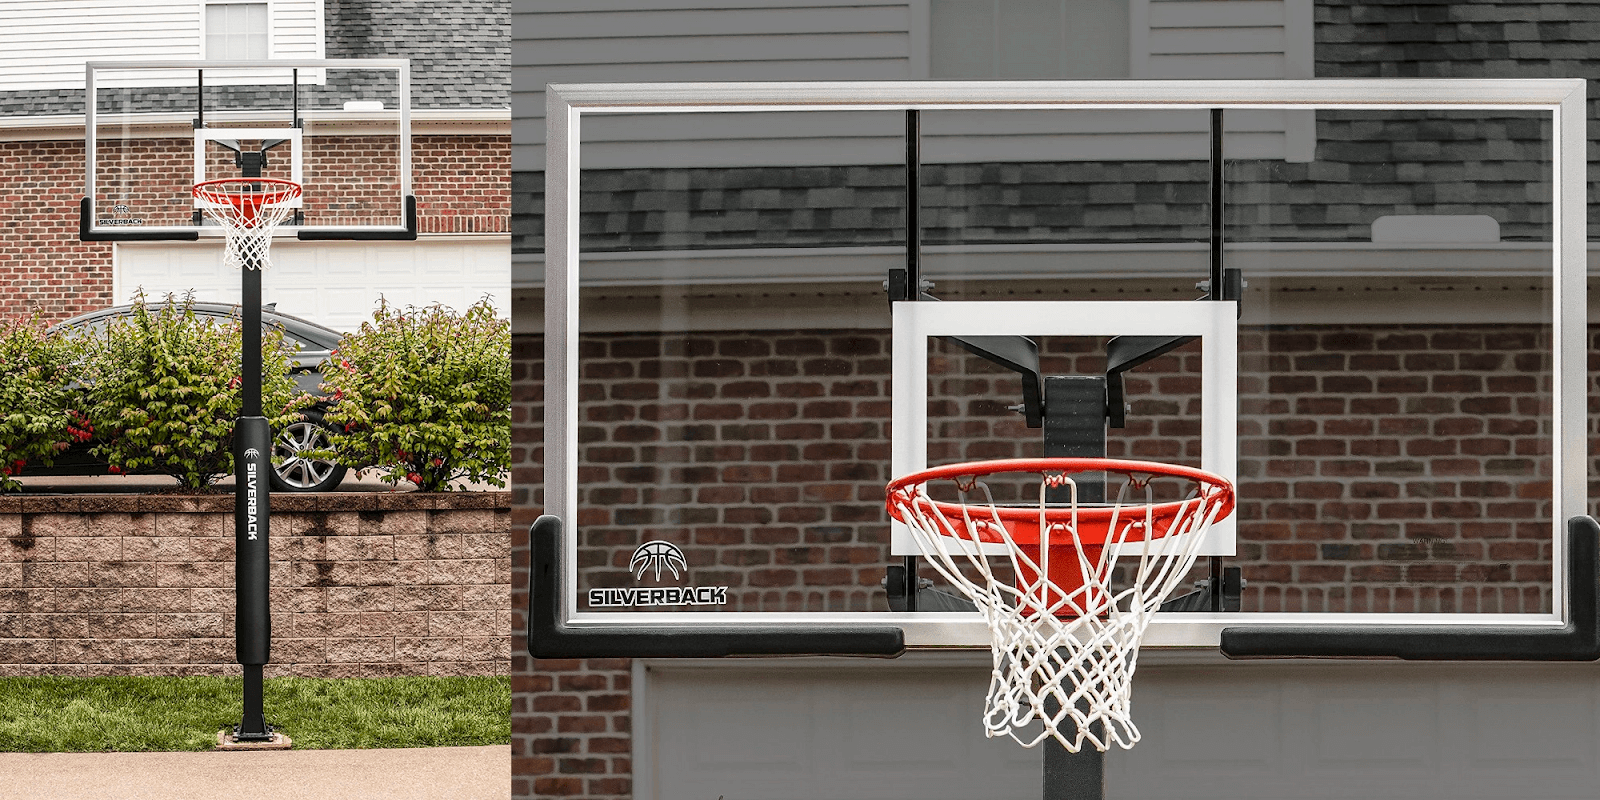 Silverback products are constructed with polycarbonate backboards